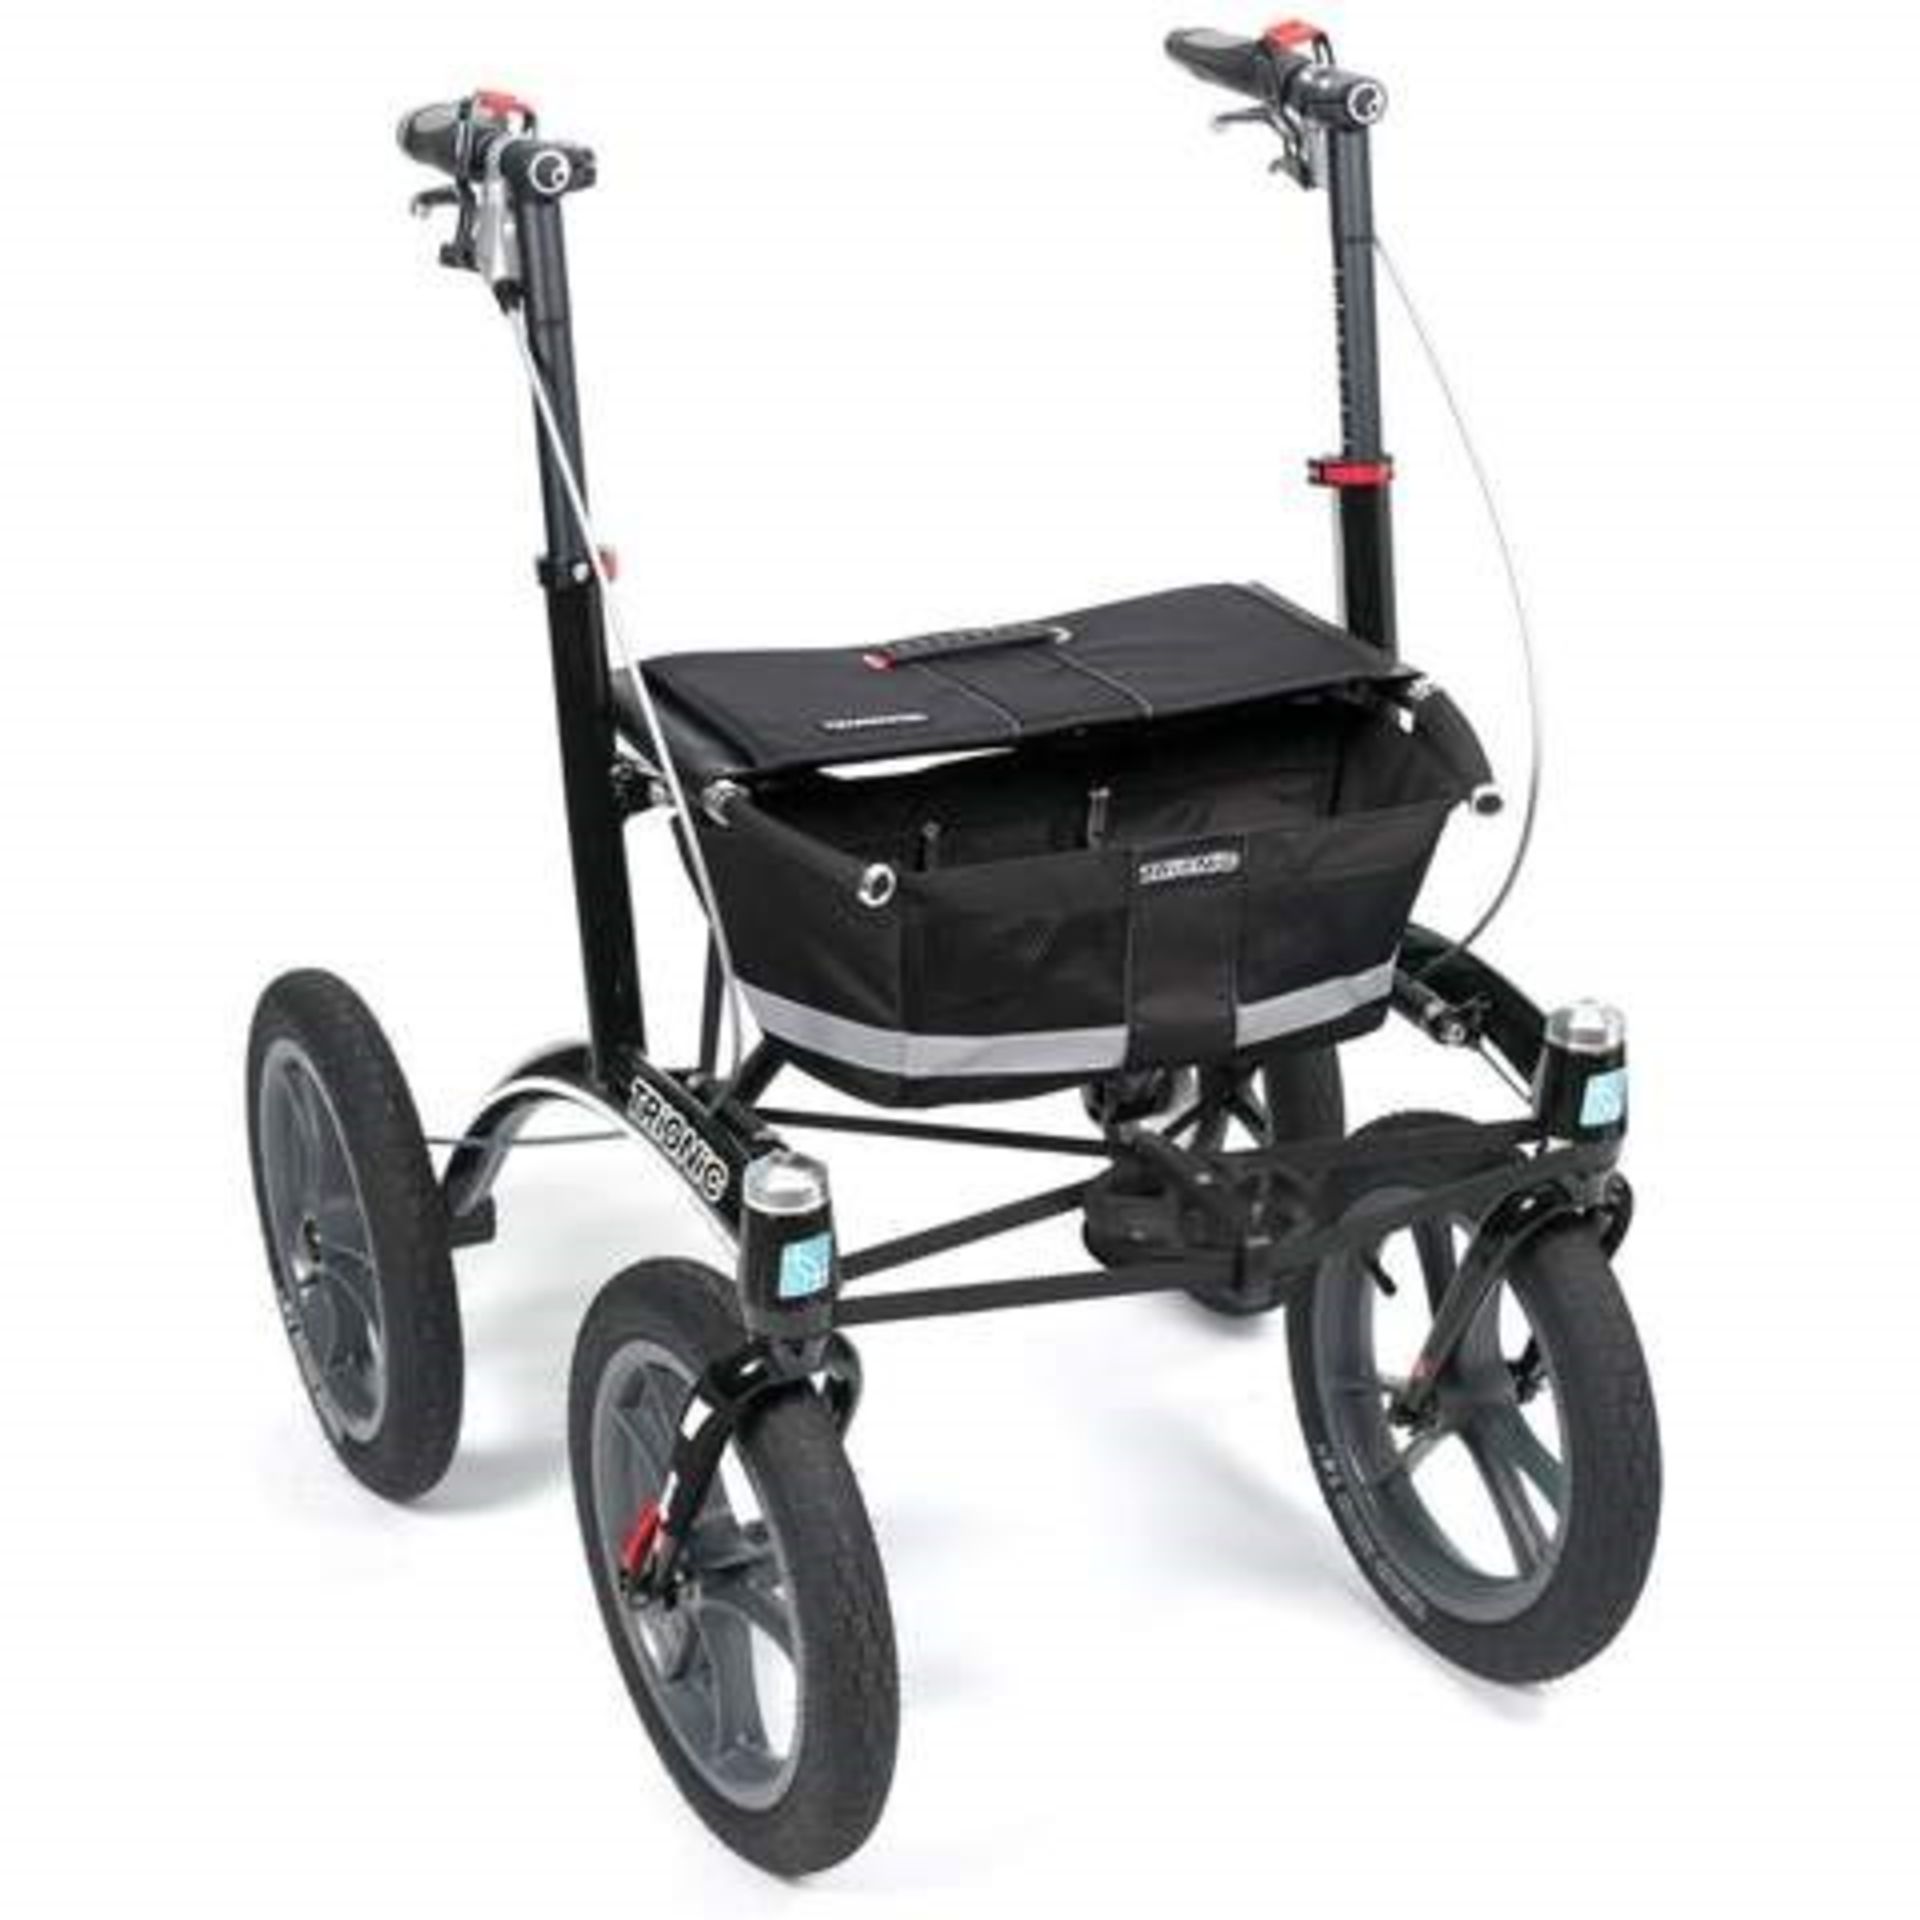 1 BOXED TRIONIC ROLLATOR WALKER 14ER COMBI - BLACK / RRP £910.80 (PUBLIC VIEWING AVAILABLE)